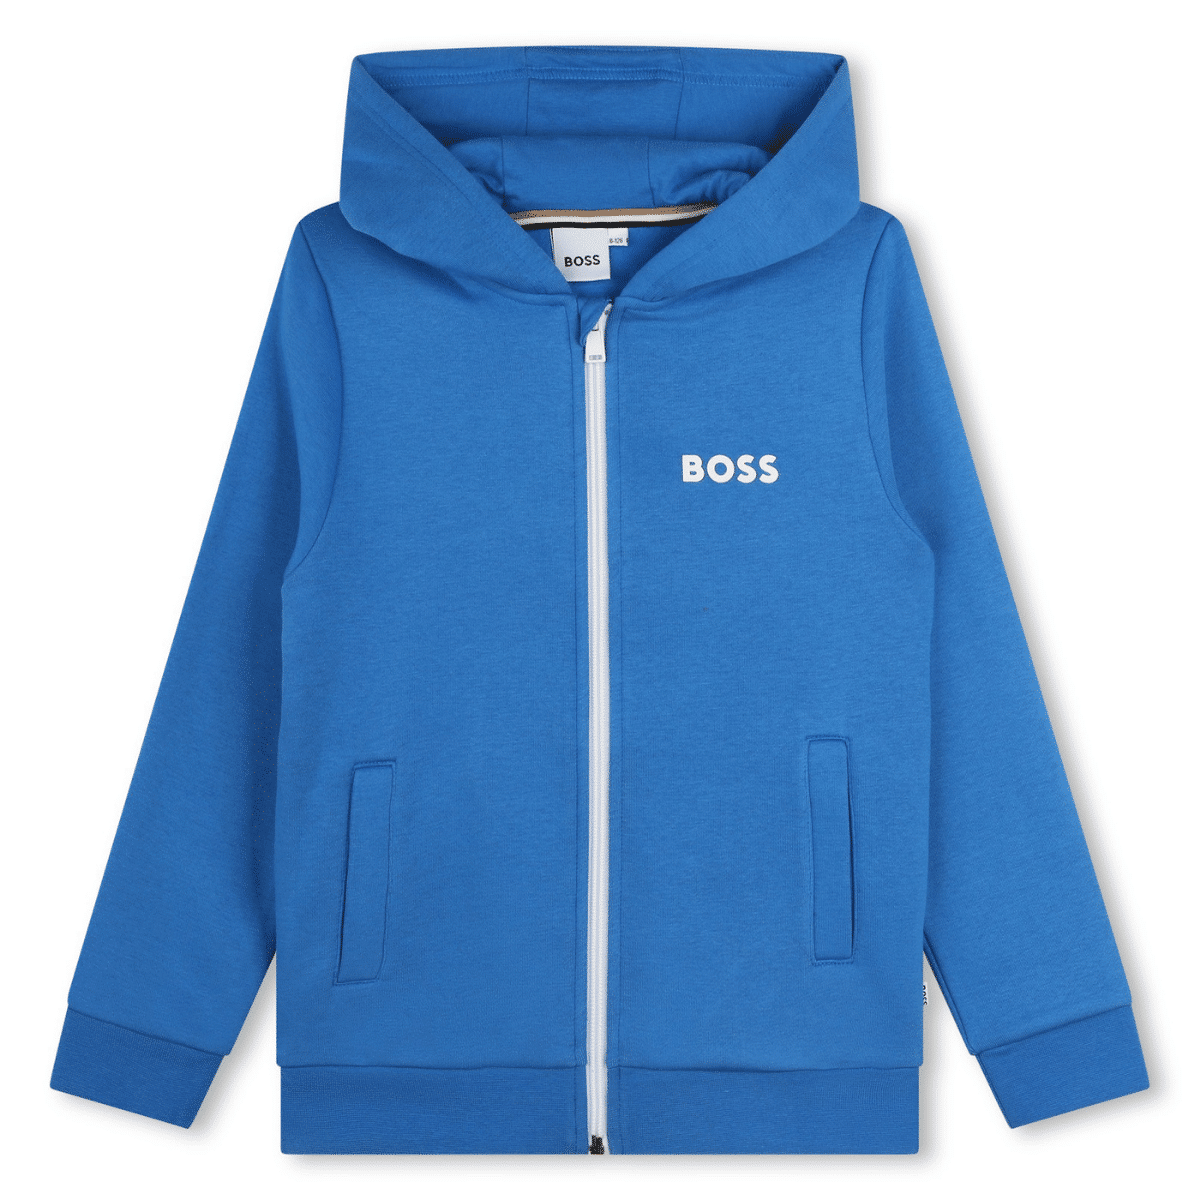 boss boys bright blue tracksuit top front view